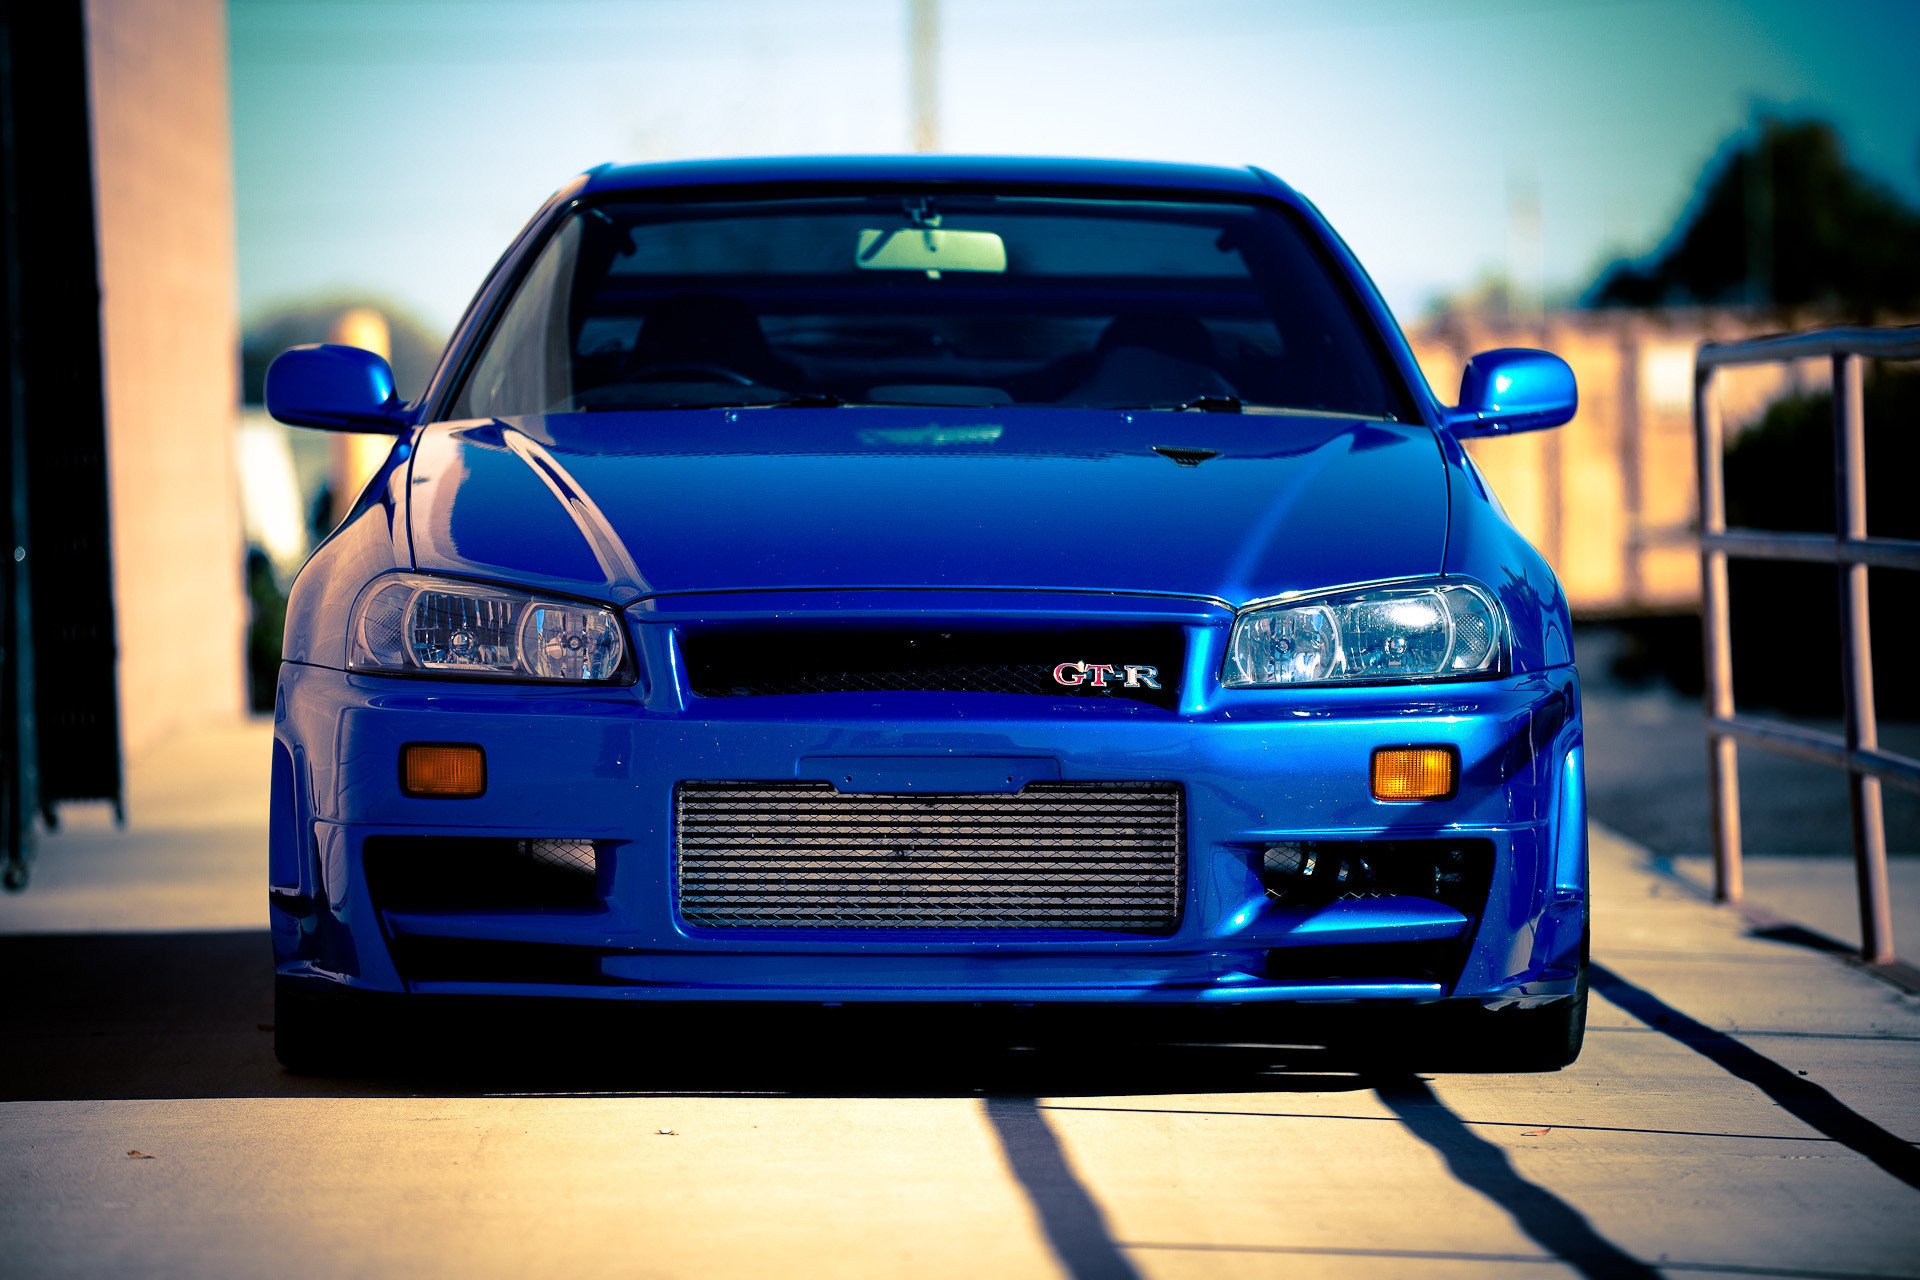 Nissan Skyline GTR R34 review history and specs of an icon